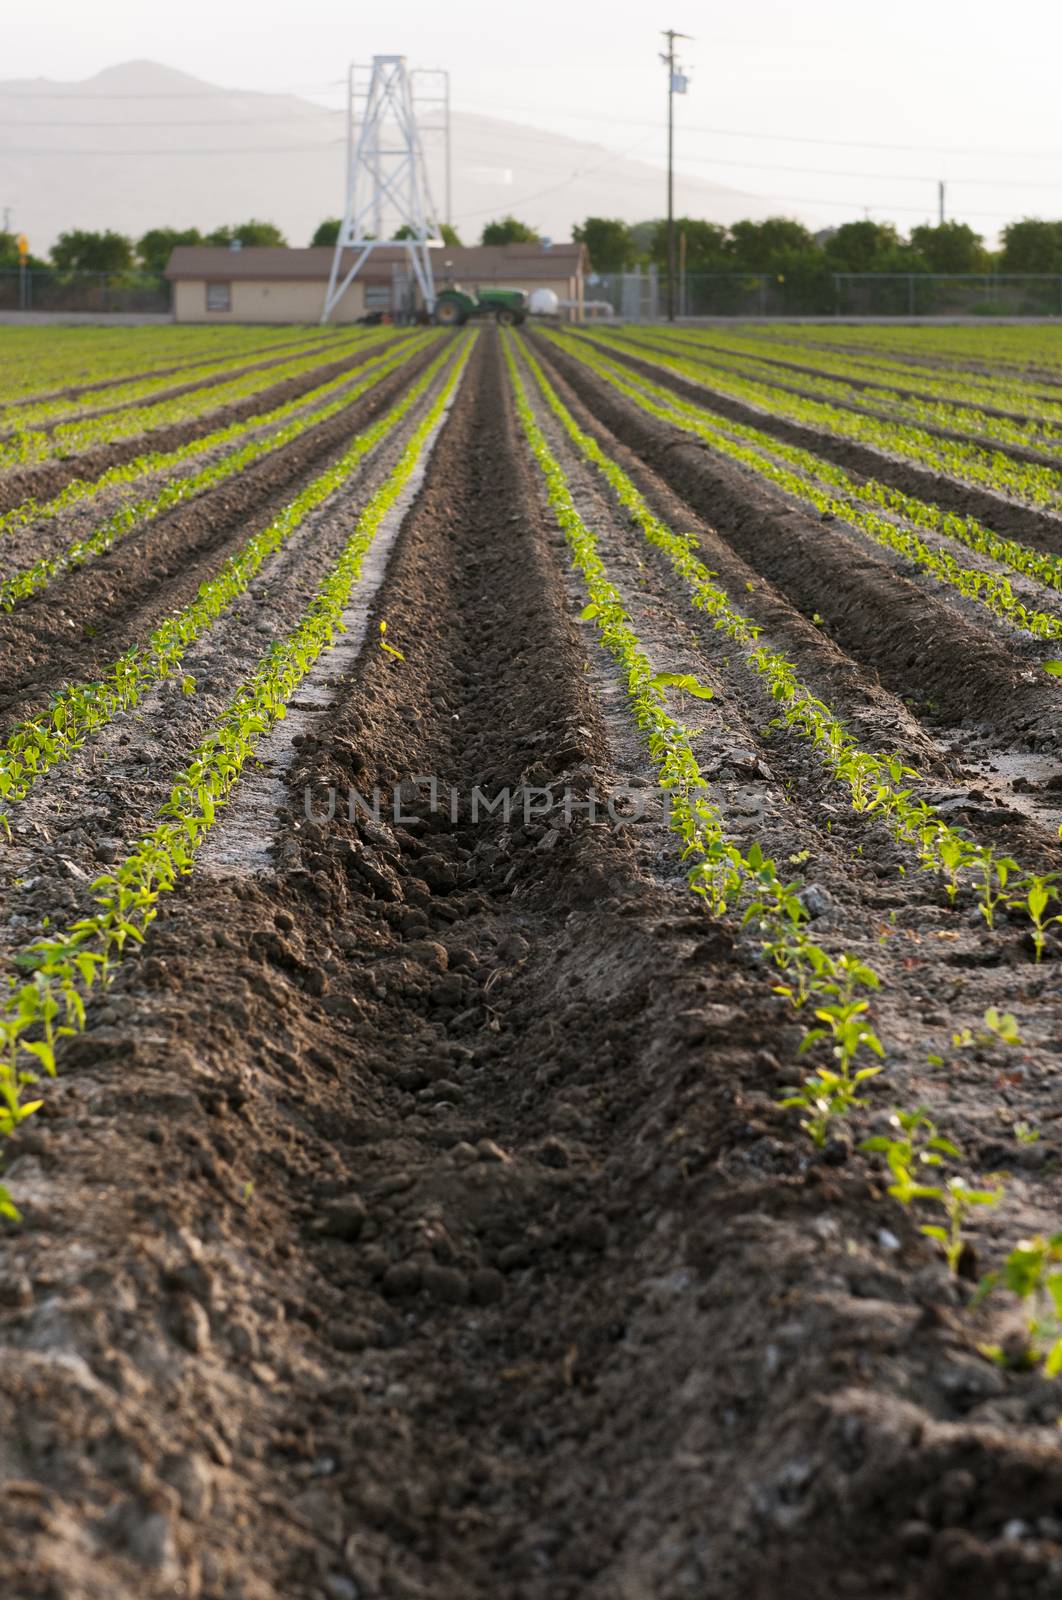 Rows of seedlings, farmland with tractor in the distance by Njean